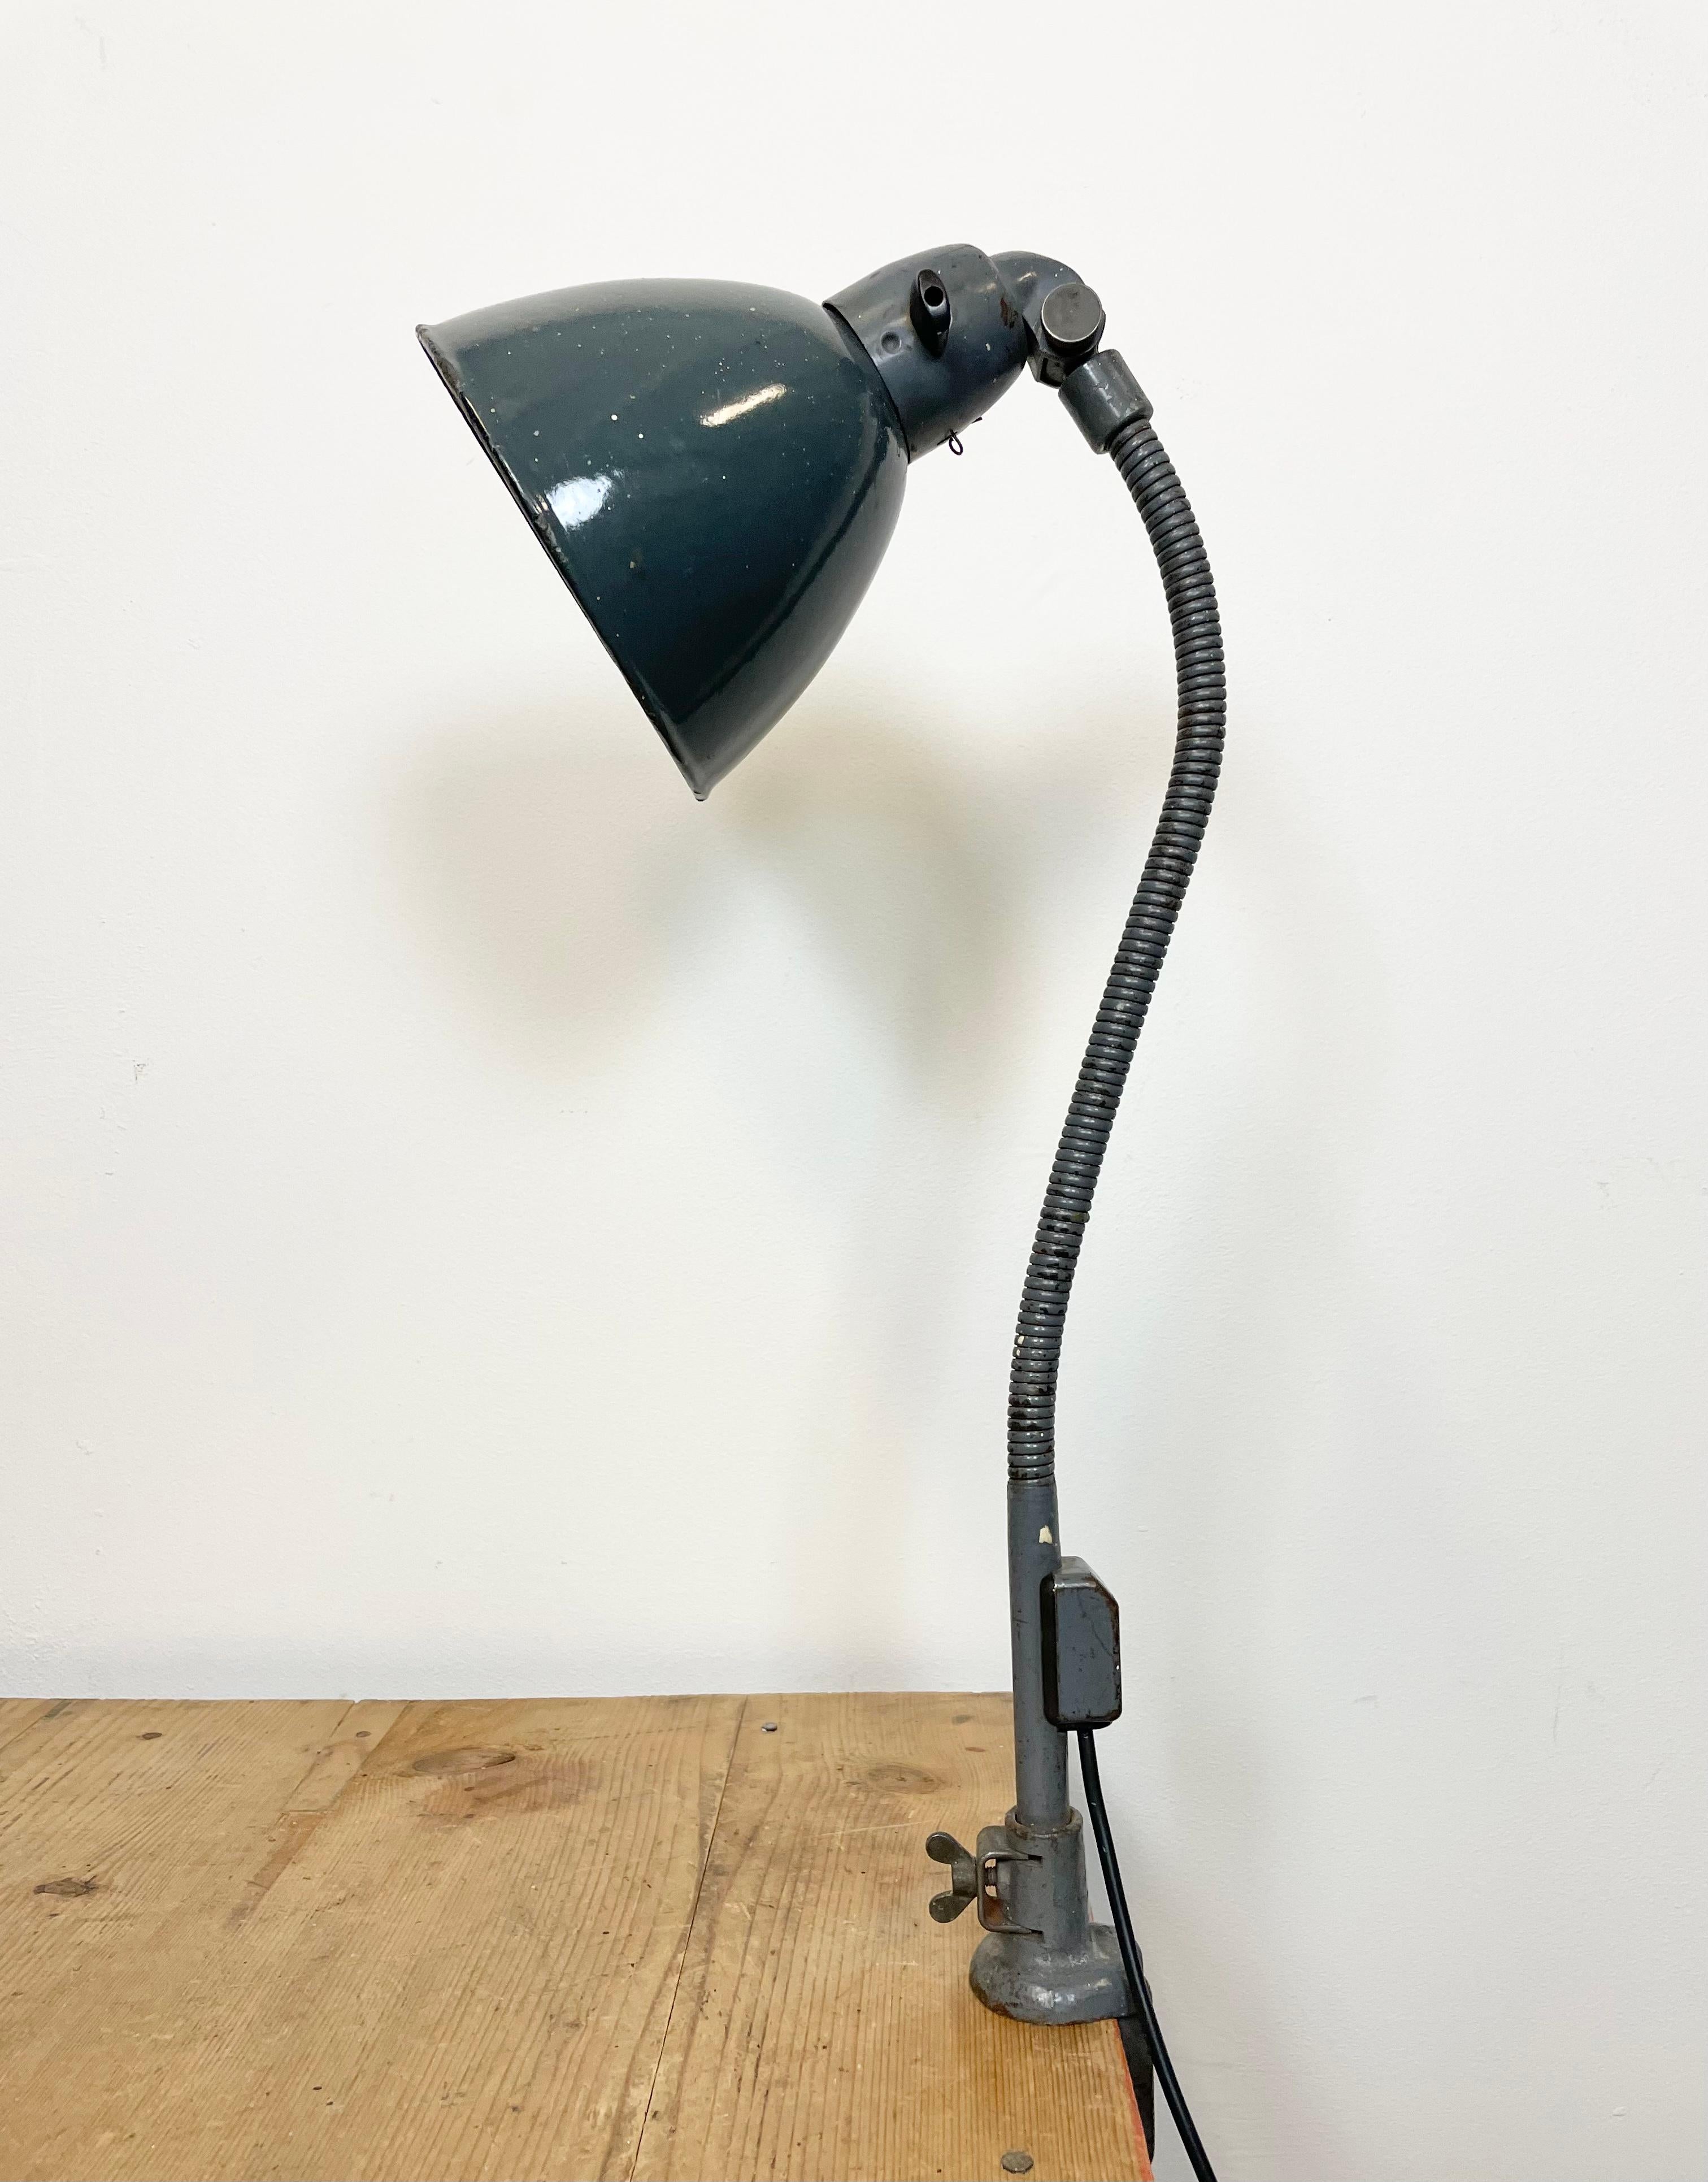 Industrial adjustable table lamp made by Siemens in Germany during the 1950s.It features grey enamel shade with white enamel interior, a cast iron clamp base and iron gooseneck. The original socket with switch requires E 27/ E 26 light bulbs.New